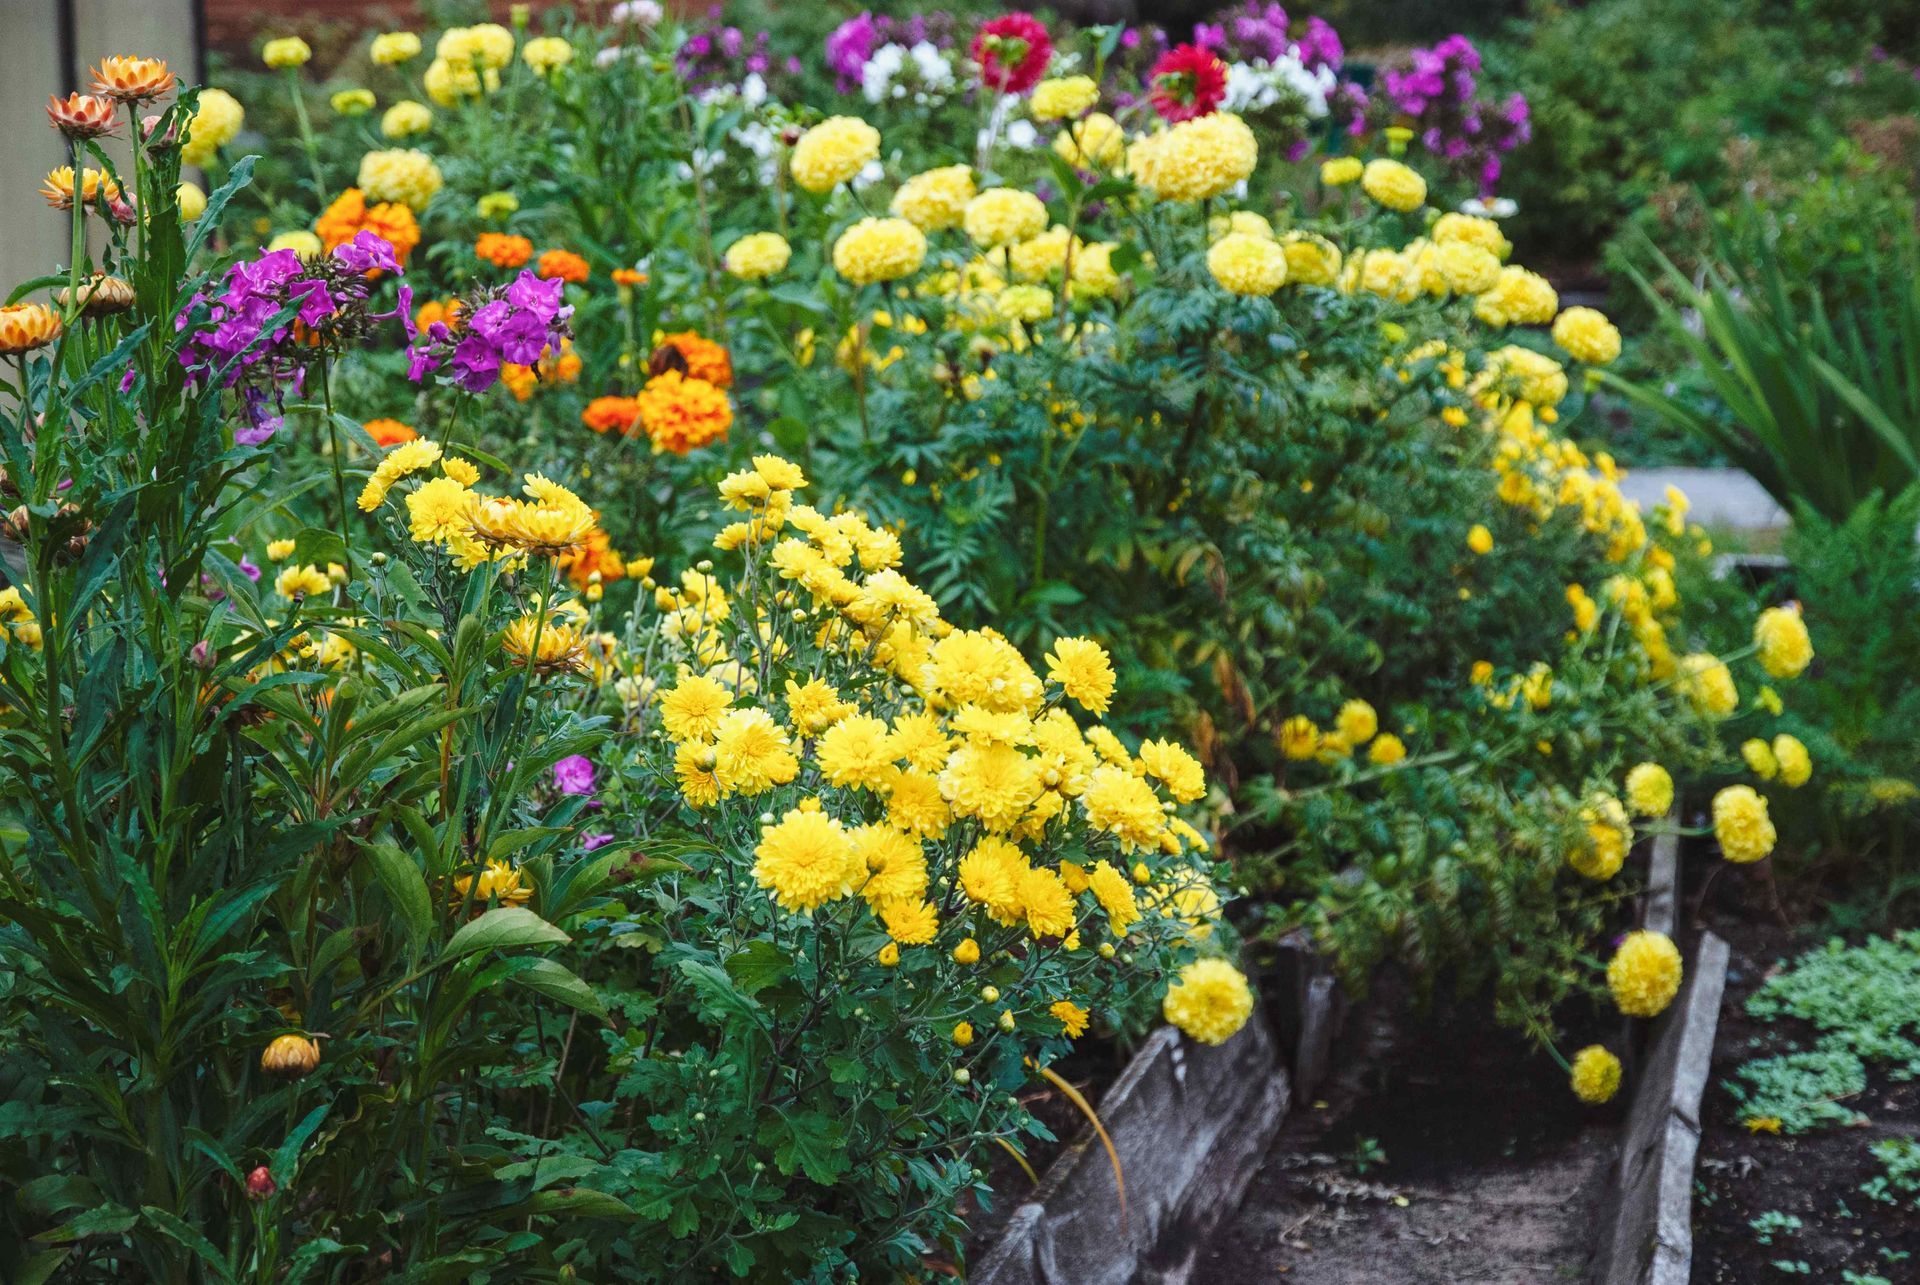 Affordable Flower Bed with Yellow and Orange Marigolds